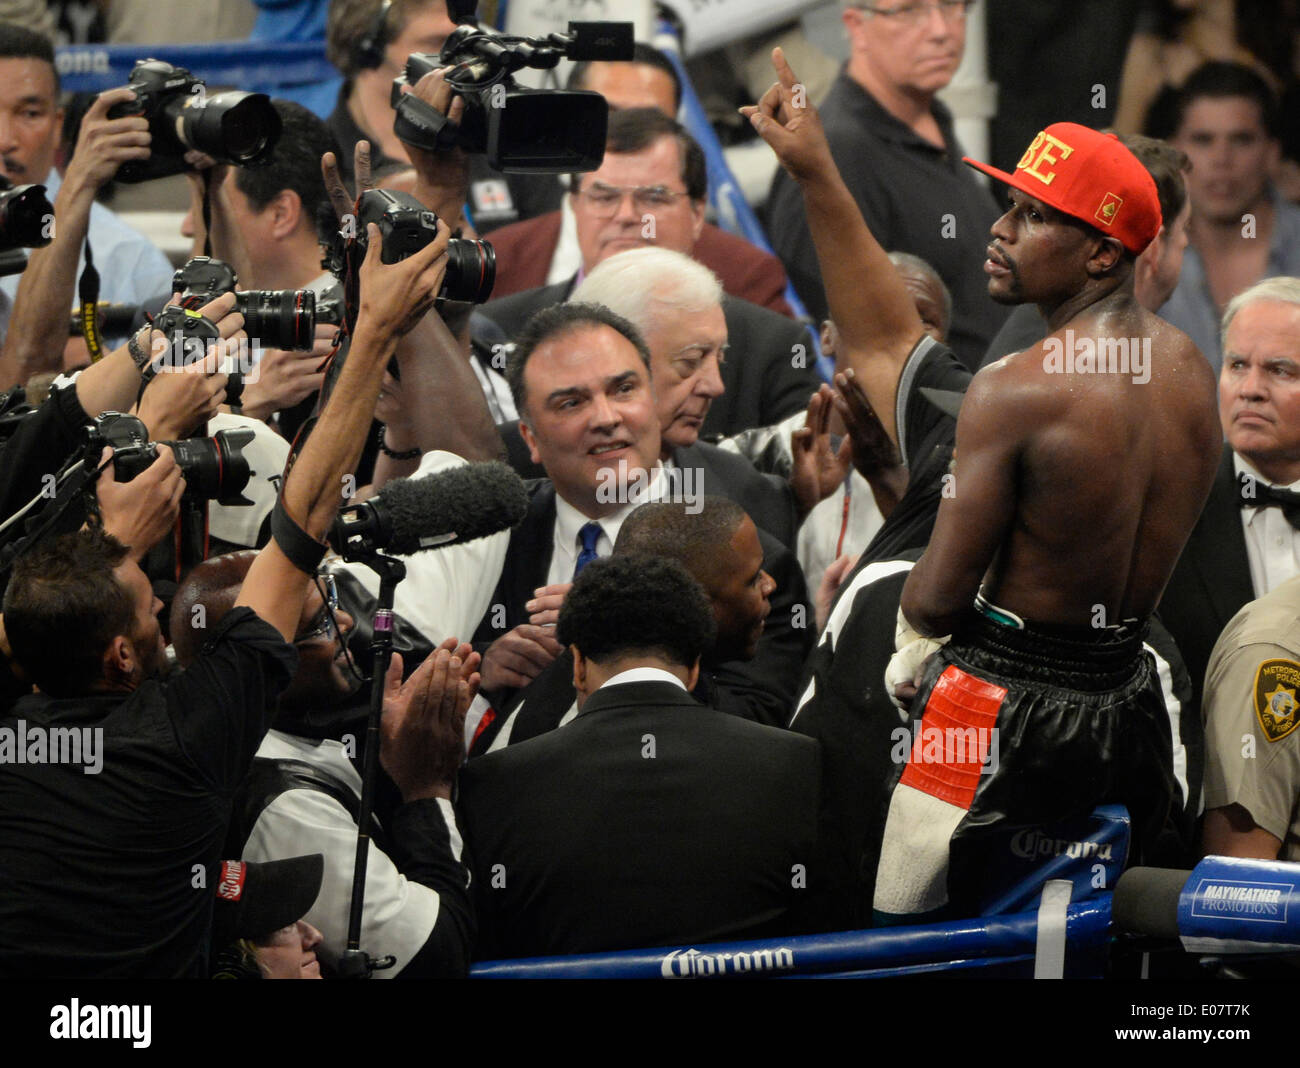 May 3, 2014. Las Vegas Nevada-USA. Floyd Mayweather Jr. reacts motionless after going 12 rounds with Marco Maidana Saturday night at the MGM grand hotel. Floyd Mayweather Jr. took the win by a majority decision over Marco Maidana for the WBC-WBA & Ring magazine welterweight title in Las Vegas. Photo by Gene Blevins/LA DailyNews/ZumaPress (Credit Image: © Gene Blevins/ZUMAPRESS.com) Stock Photo